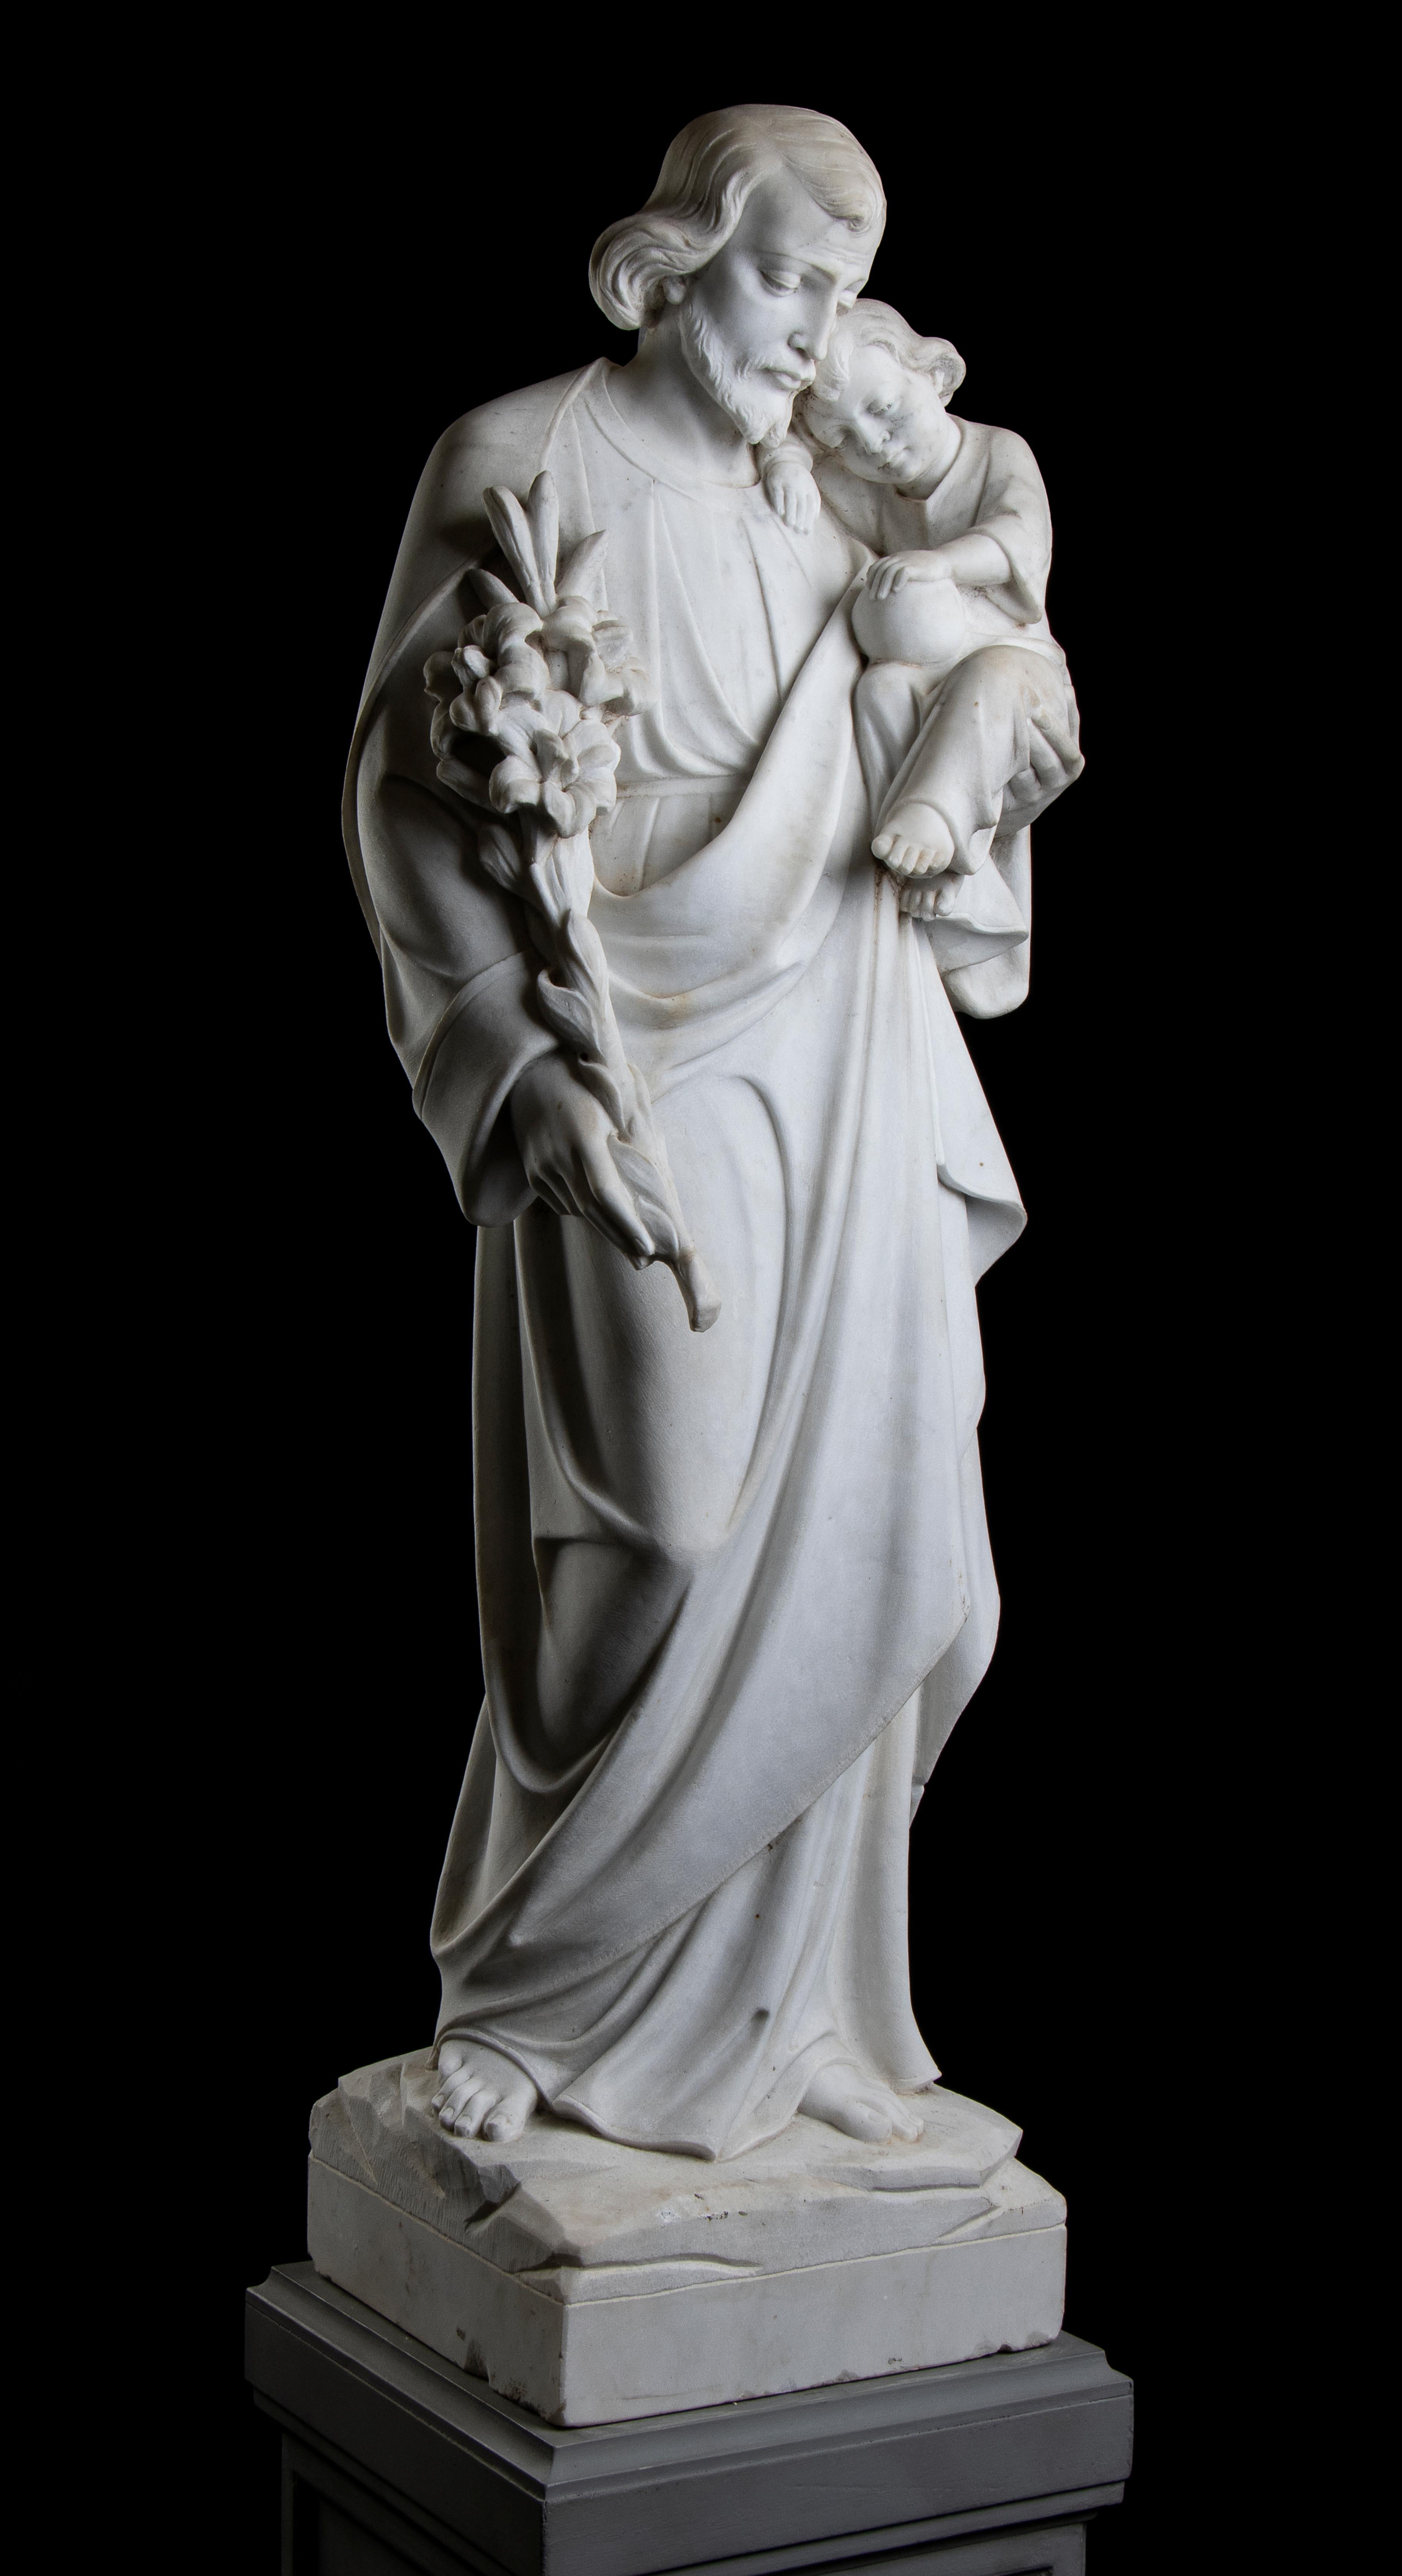 A very interesting Italian white marble statuary sculpture of Saint Jospeh with Jesus Christ as child, Italian school of the 19th Century.
Saint Joseph portrayed in full, with the lily flower in his right hand and resting along his arm until it